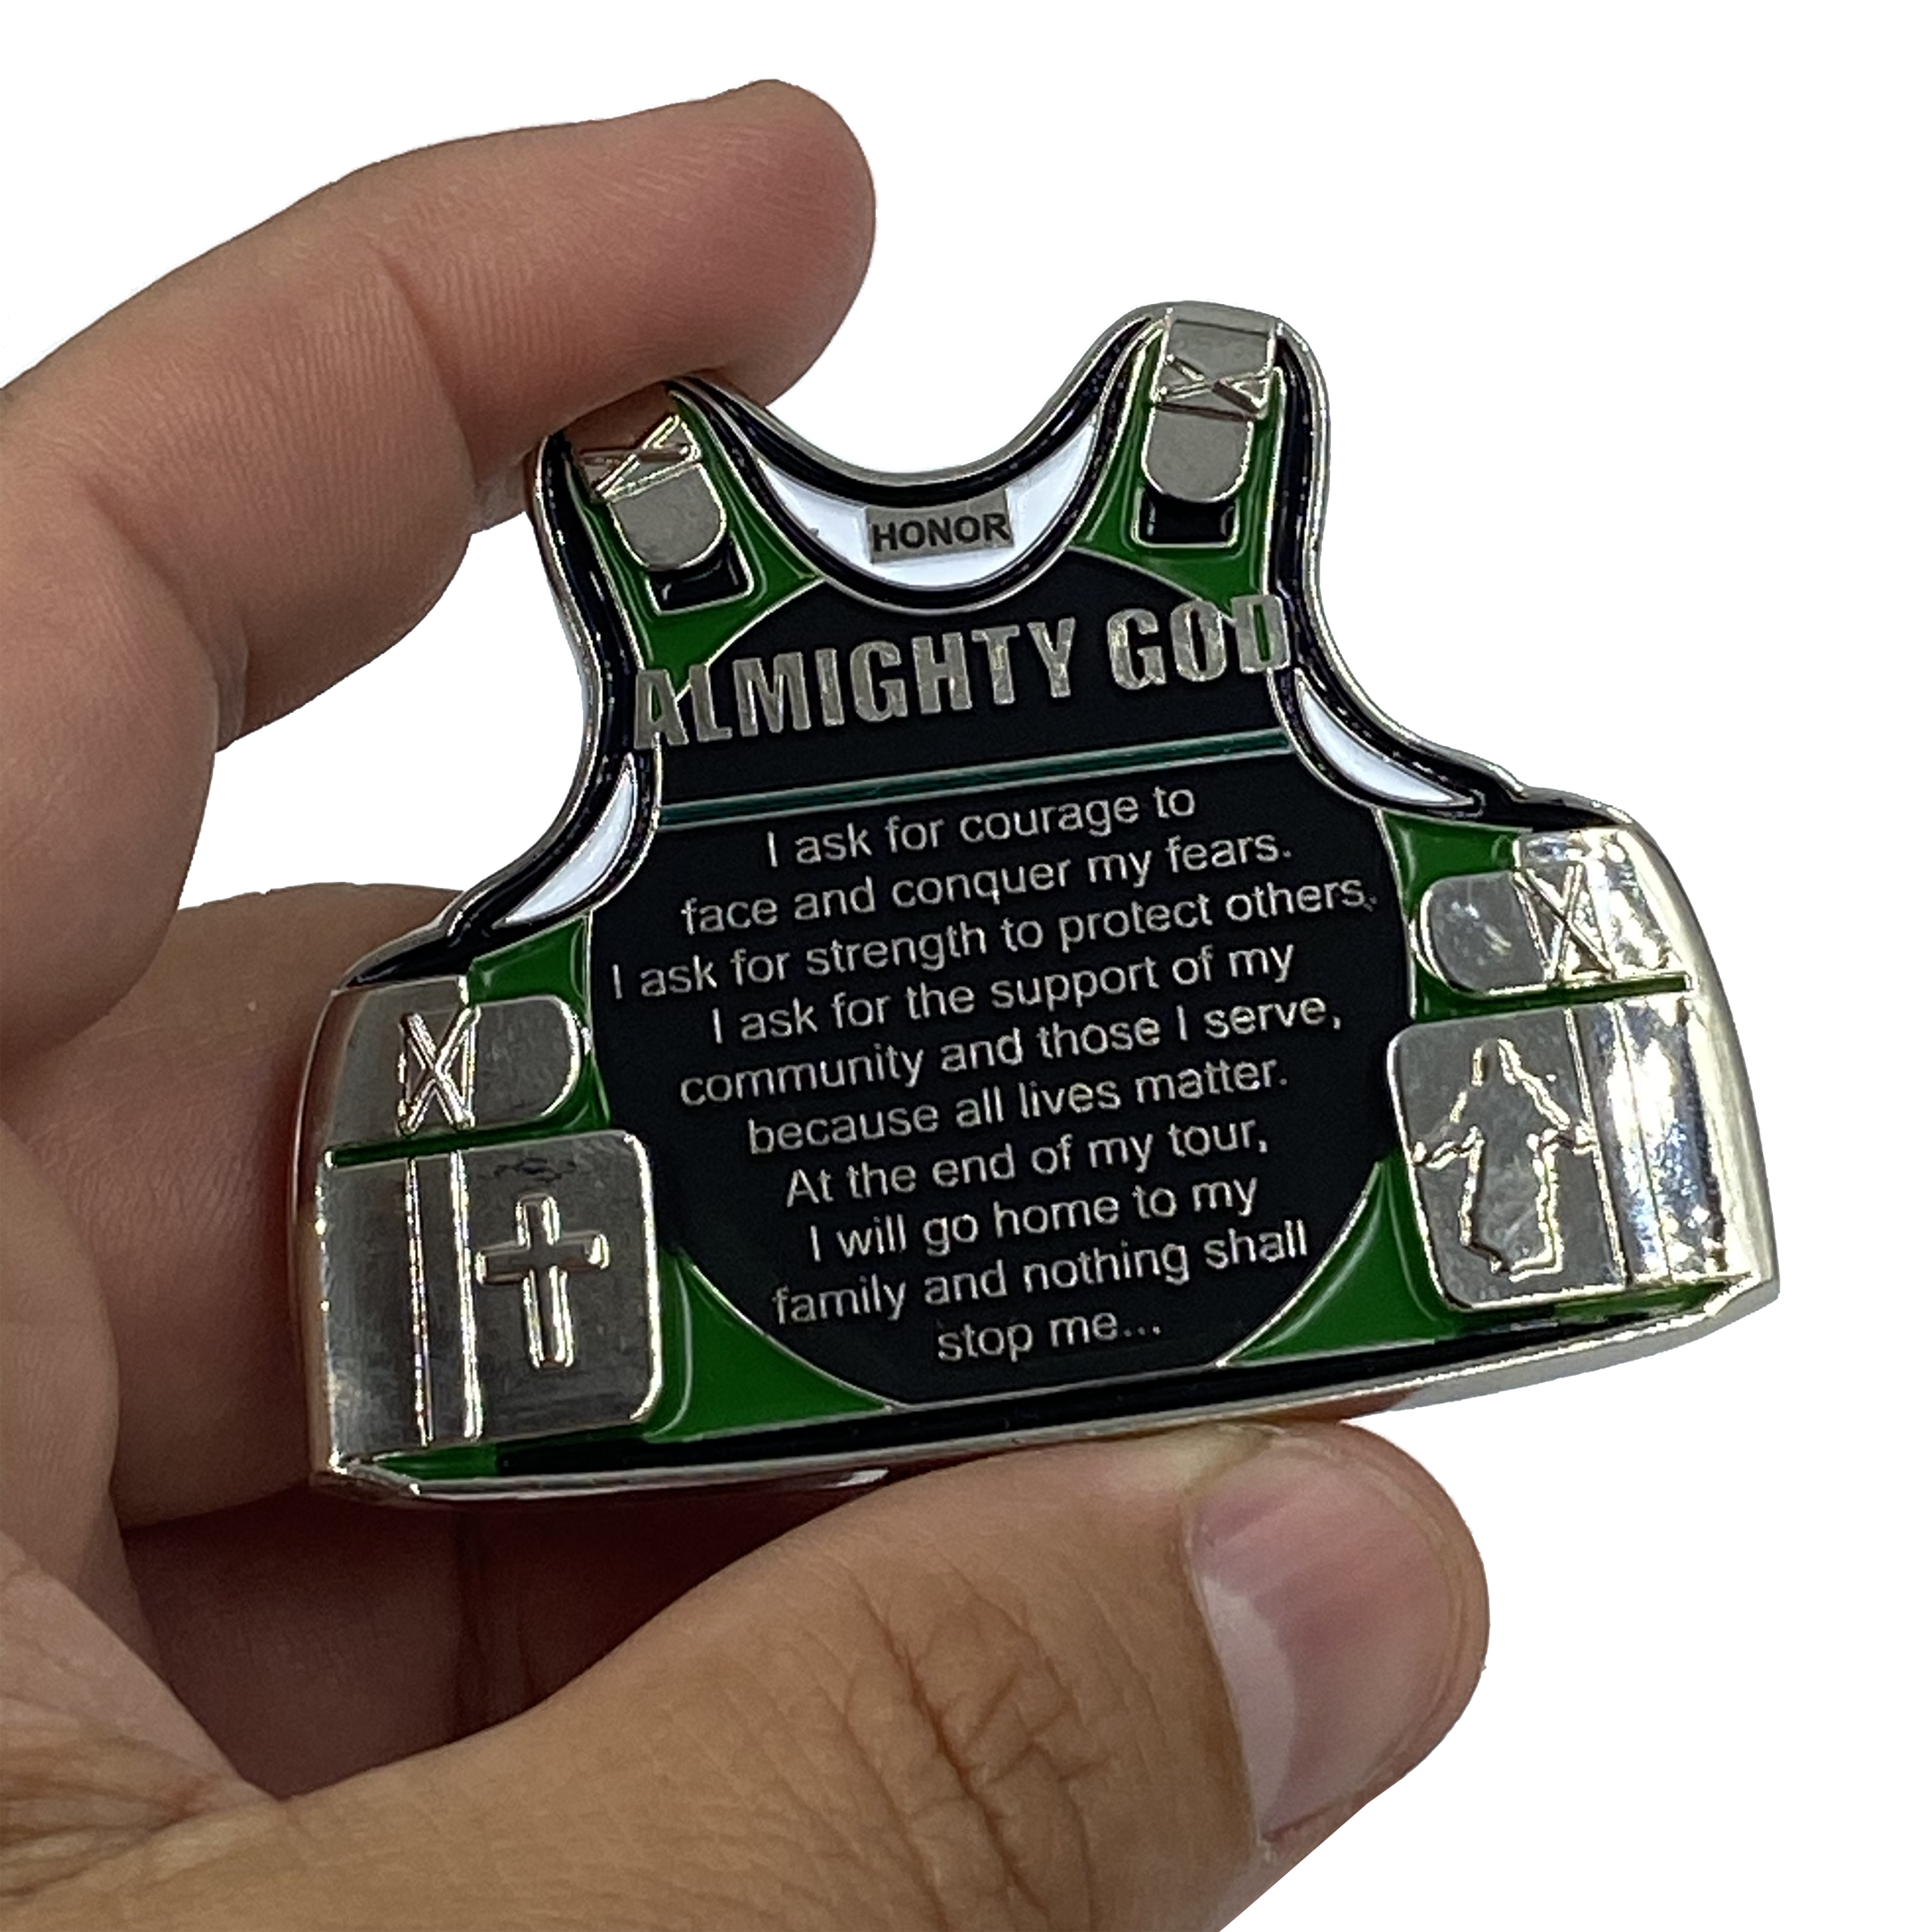 J-004 Police Officer's Prayer God Almighty Challenge Coin Thin Green Line Tactical Body Armor Border Patrol Marines Army Deputy Sheriff